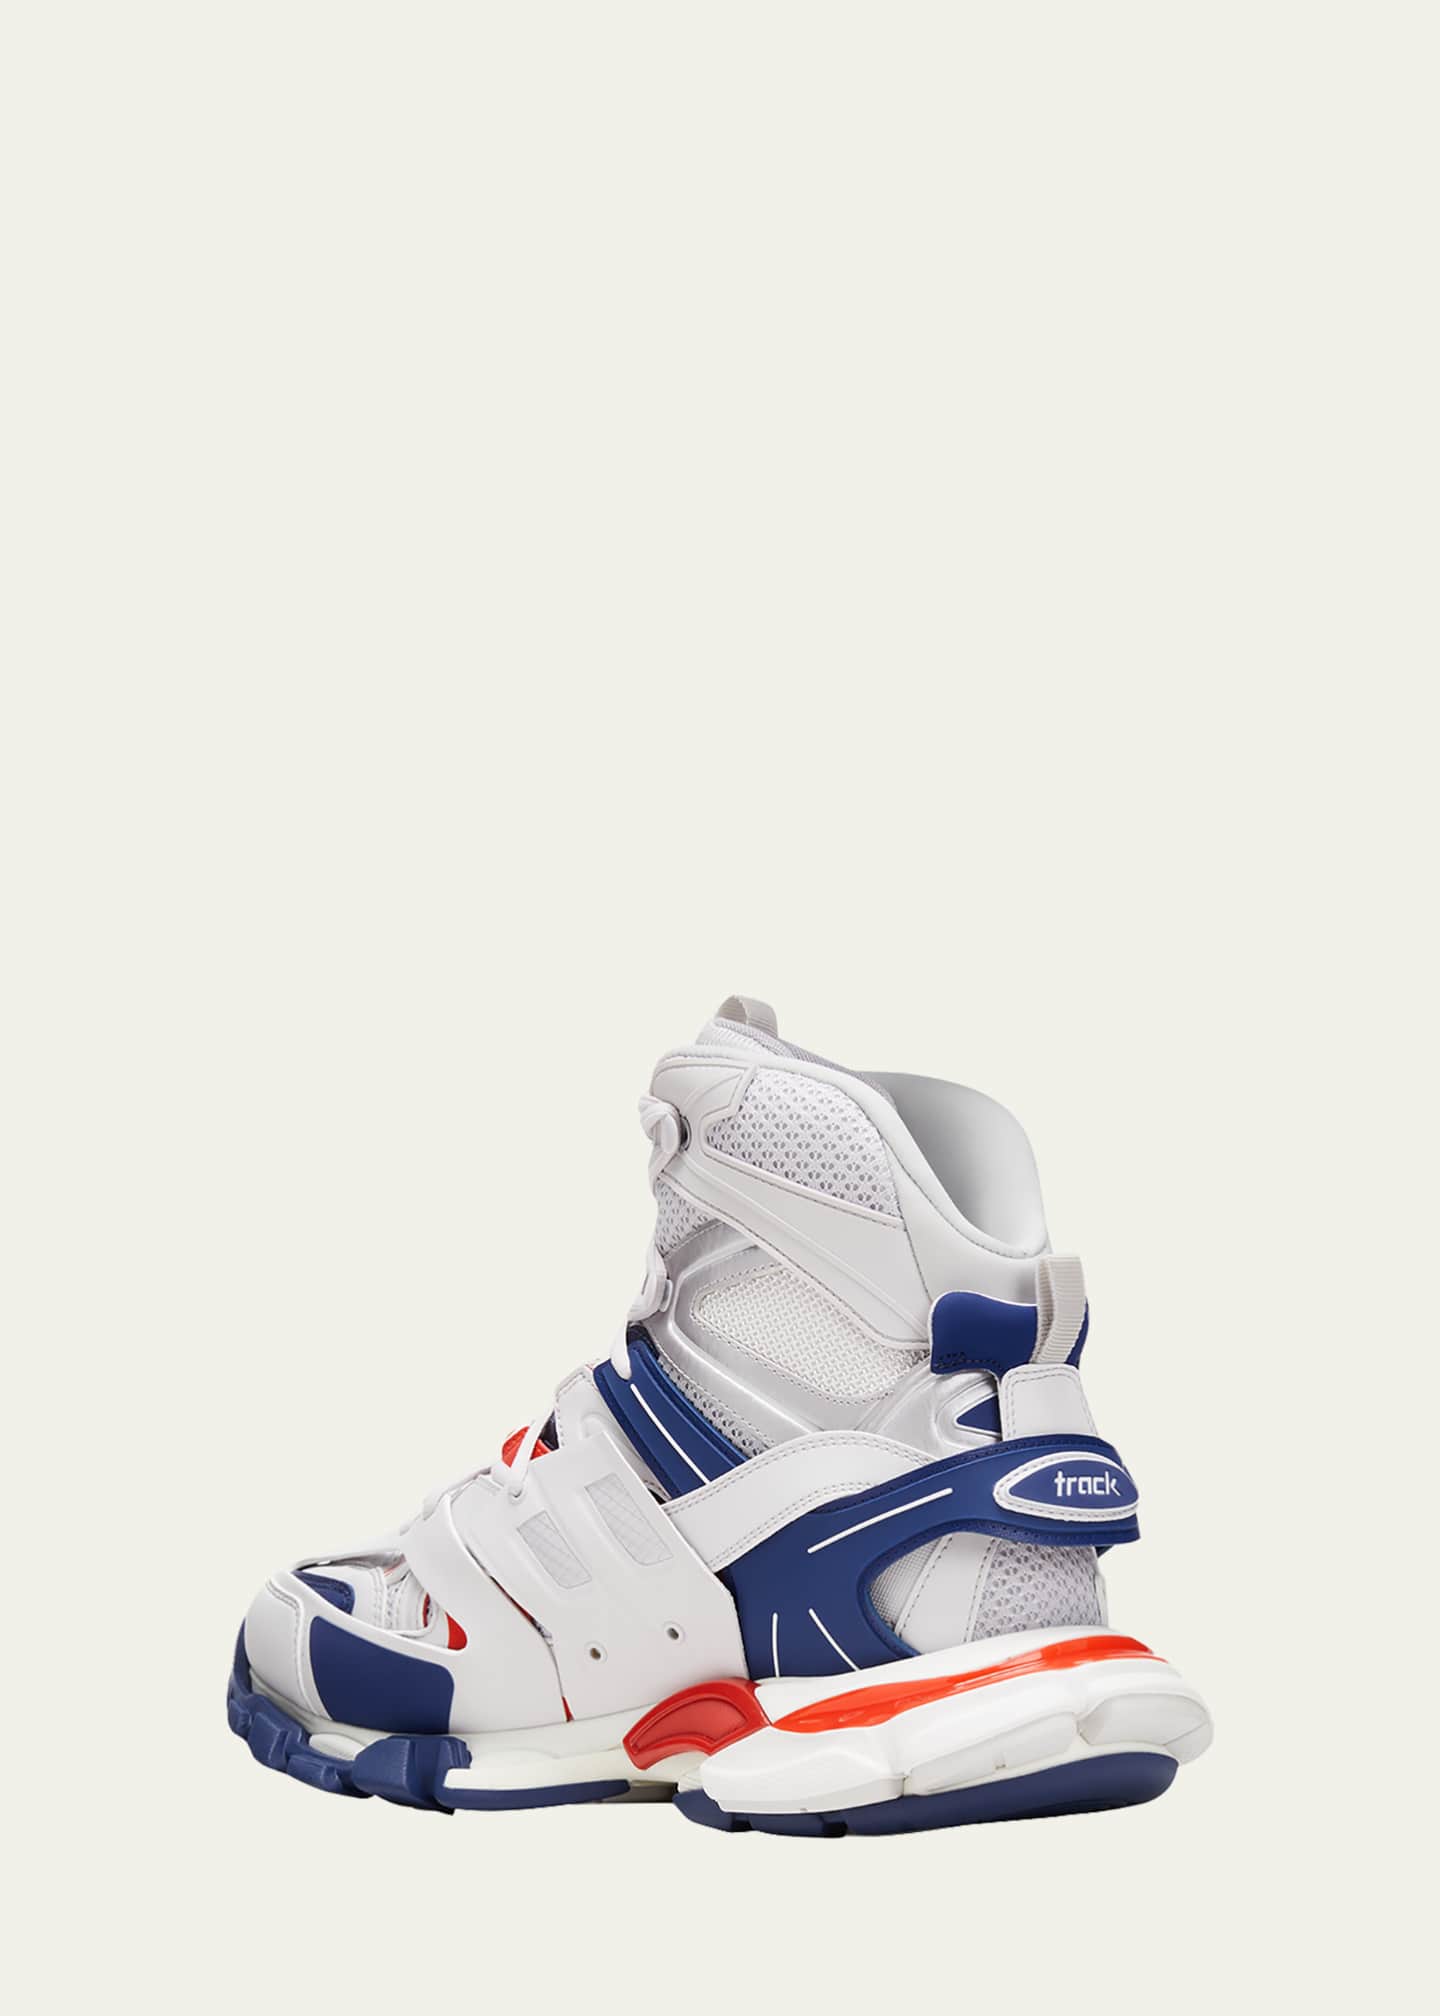 Balenciaga Track 2 Blue Red - Blue - Low-top Sneakers